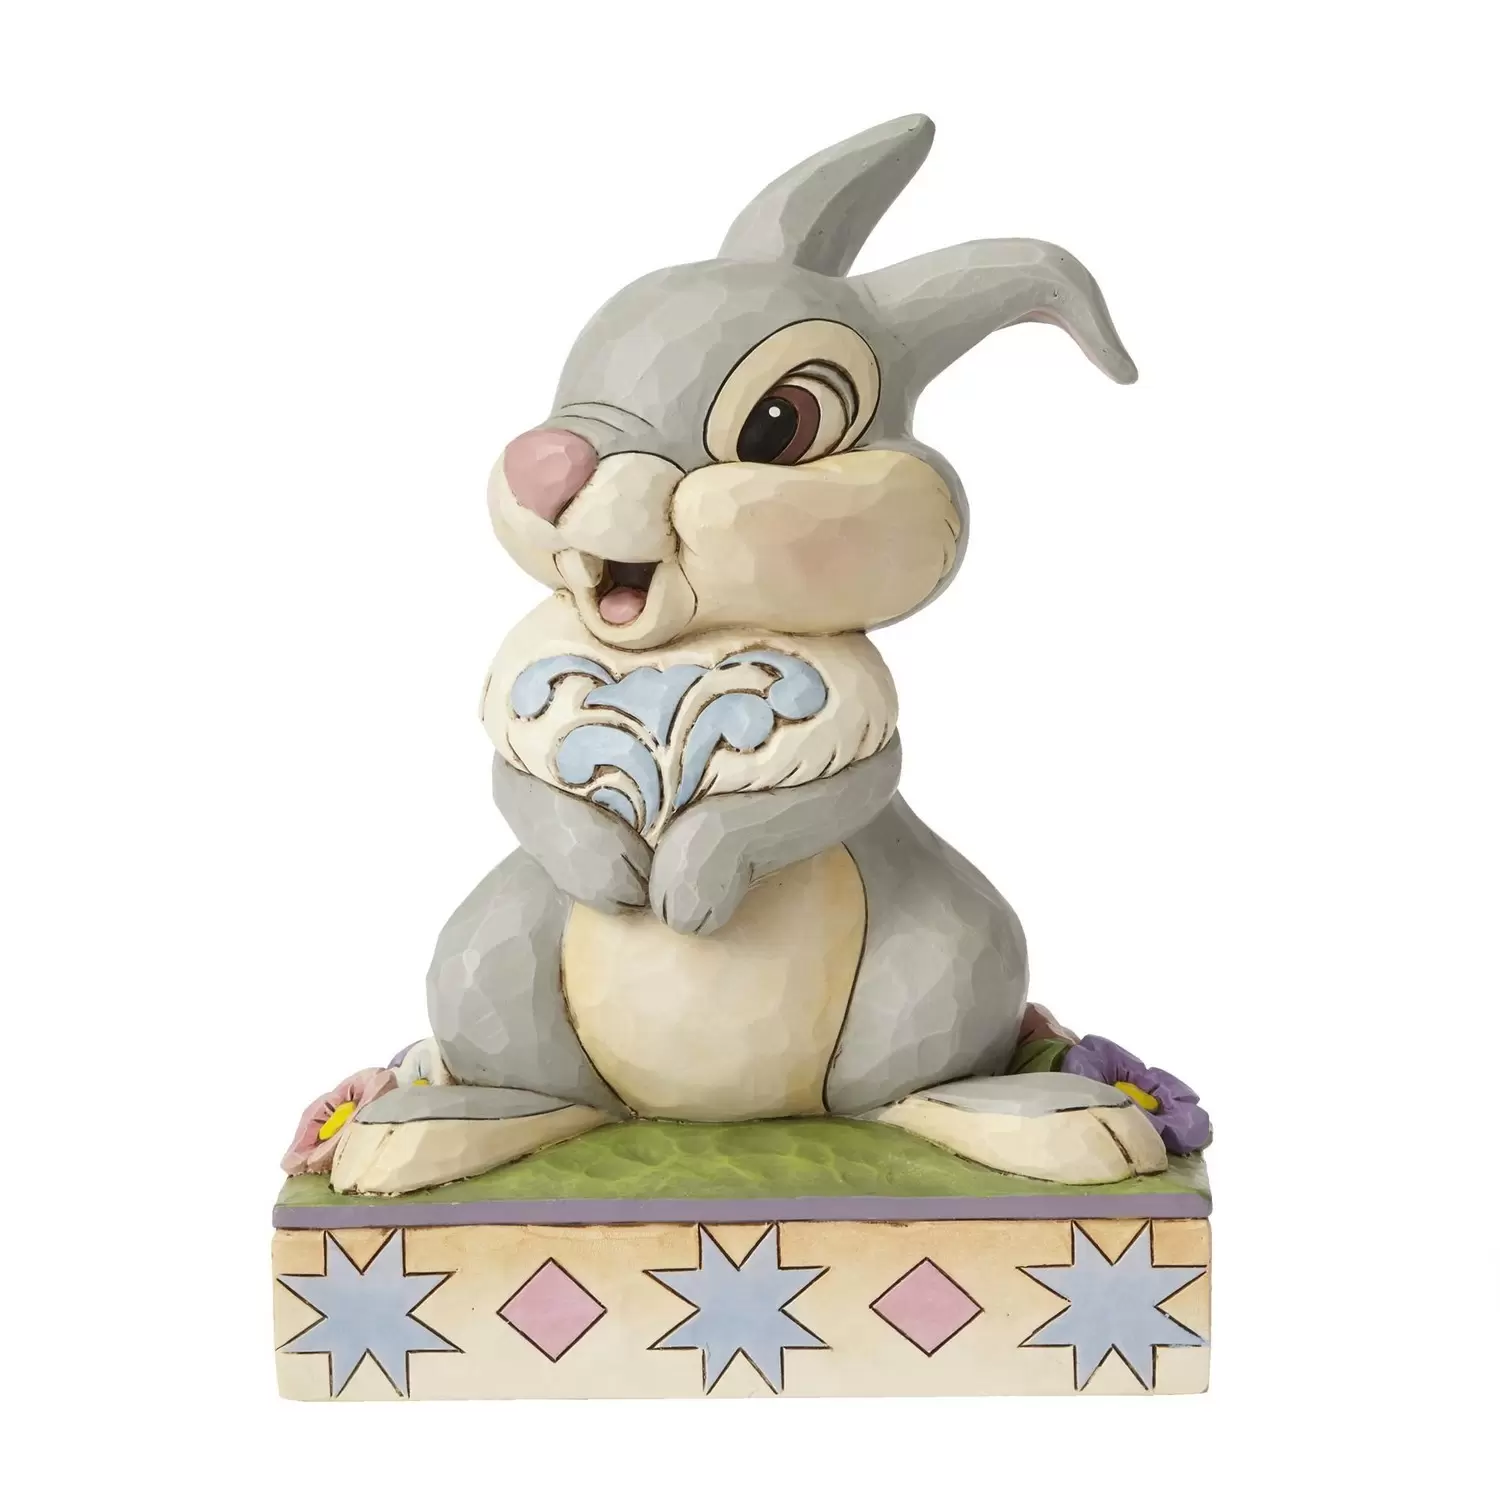 Disney Traditions by Jim Shore - Hopping into Spring - Thumper 75th Anniversary